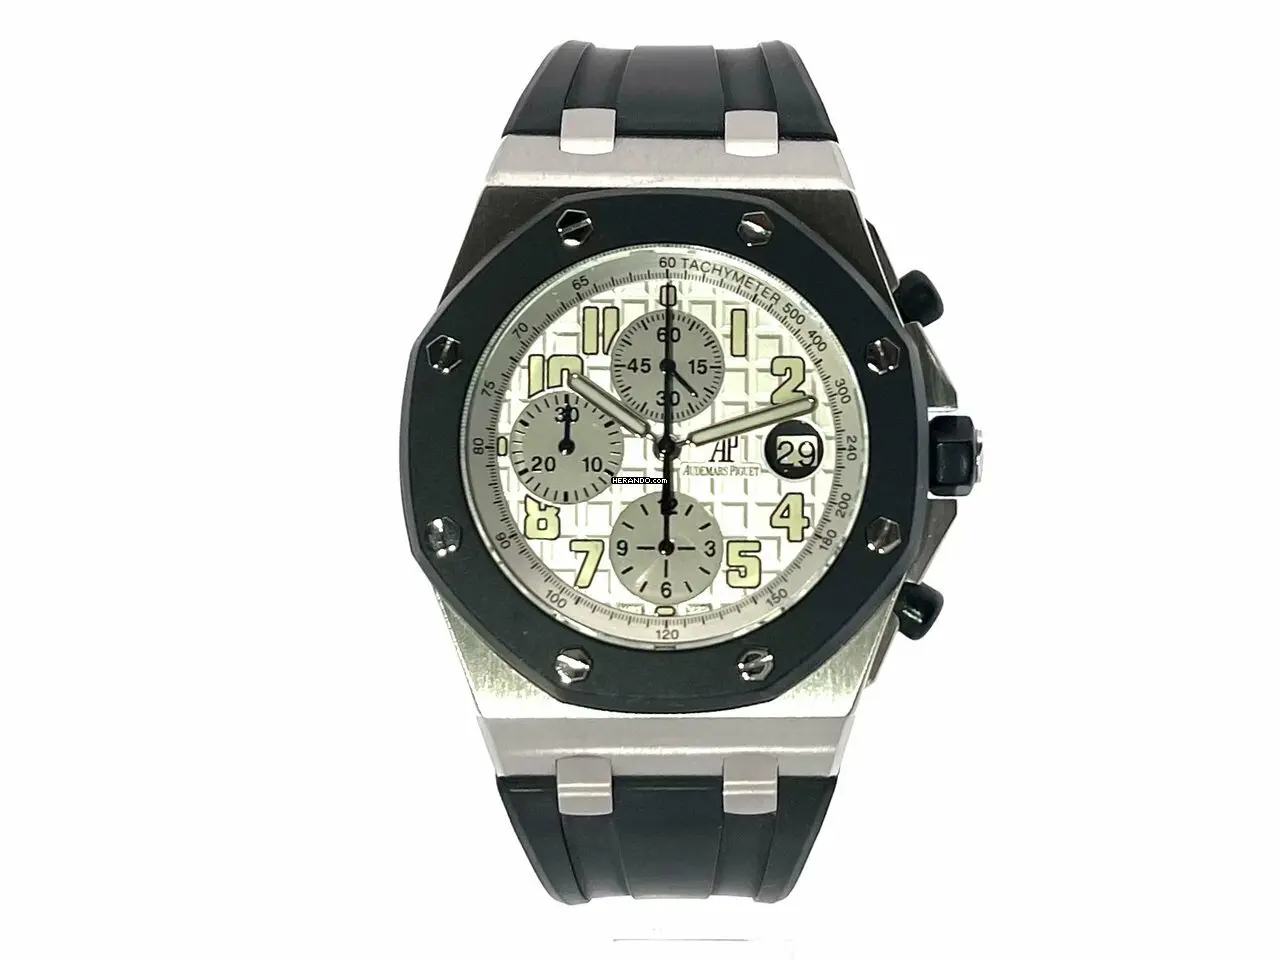 watches-322990-27752871-jalvswel8hho47dr75xi8p1n-ExtraLarge.webp